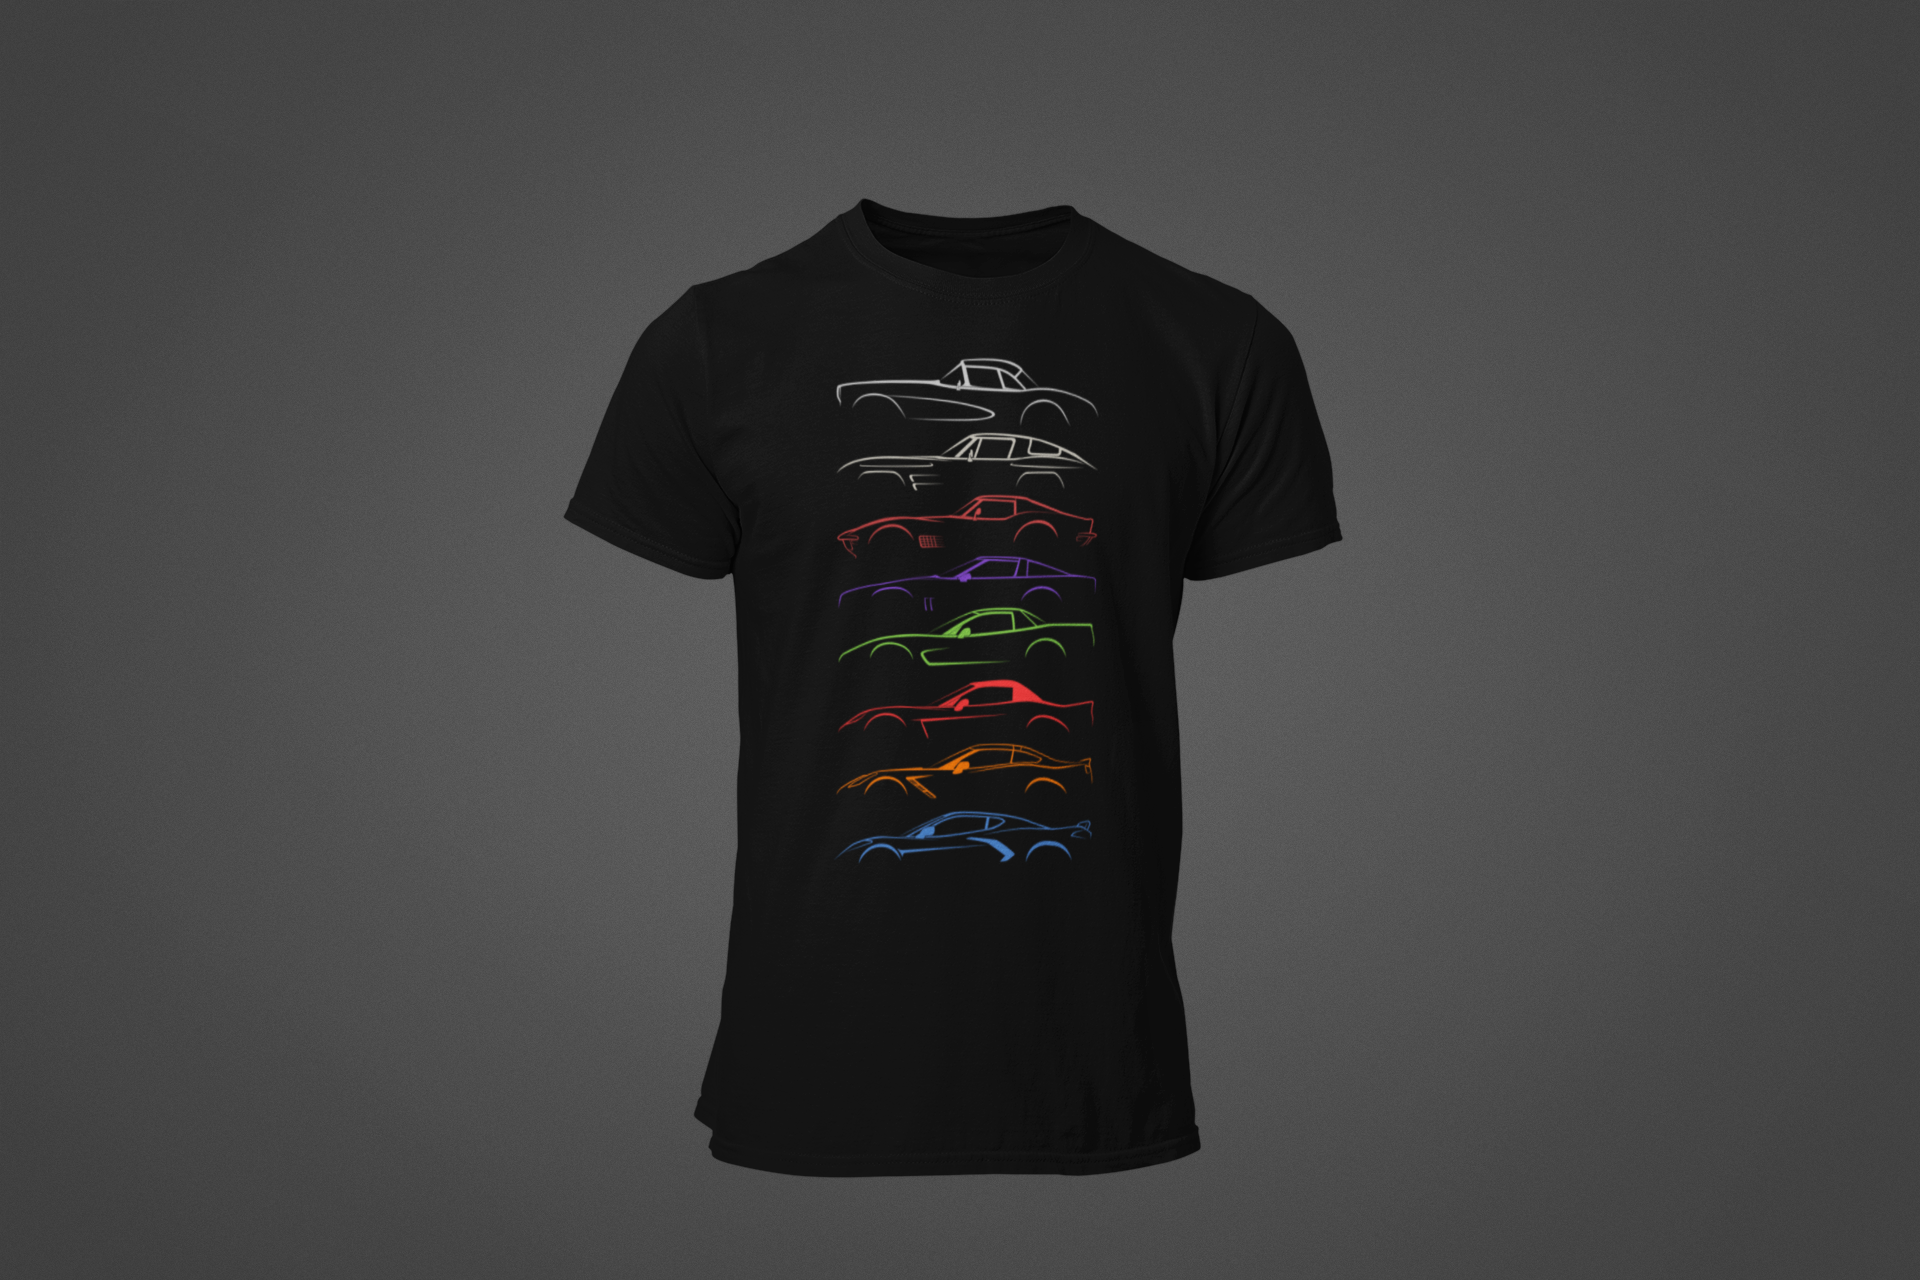 A Corvette tee-shirt, showing all of the generations of corvettes, made by 100mph.